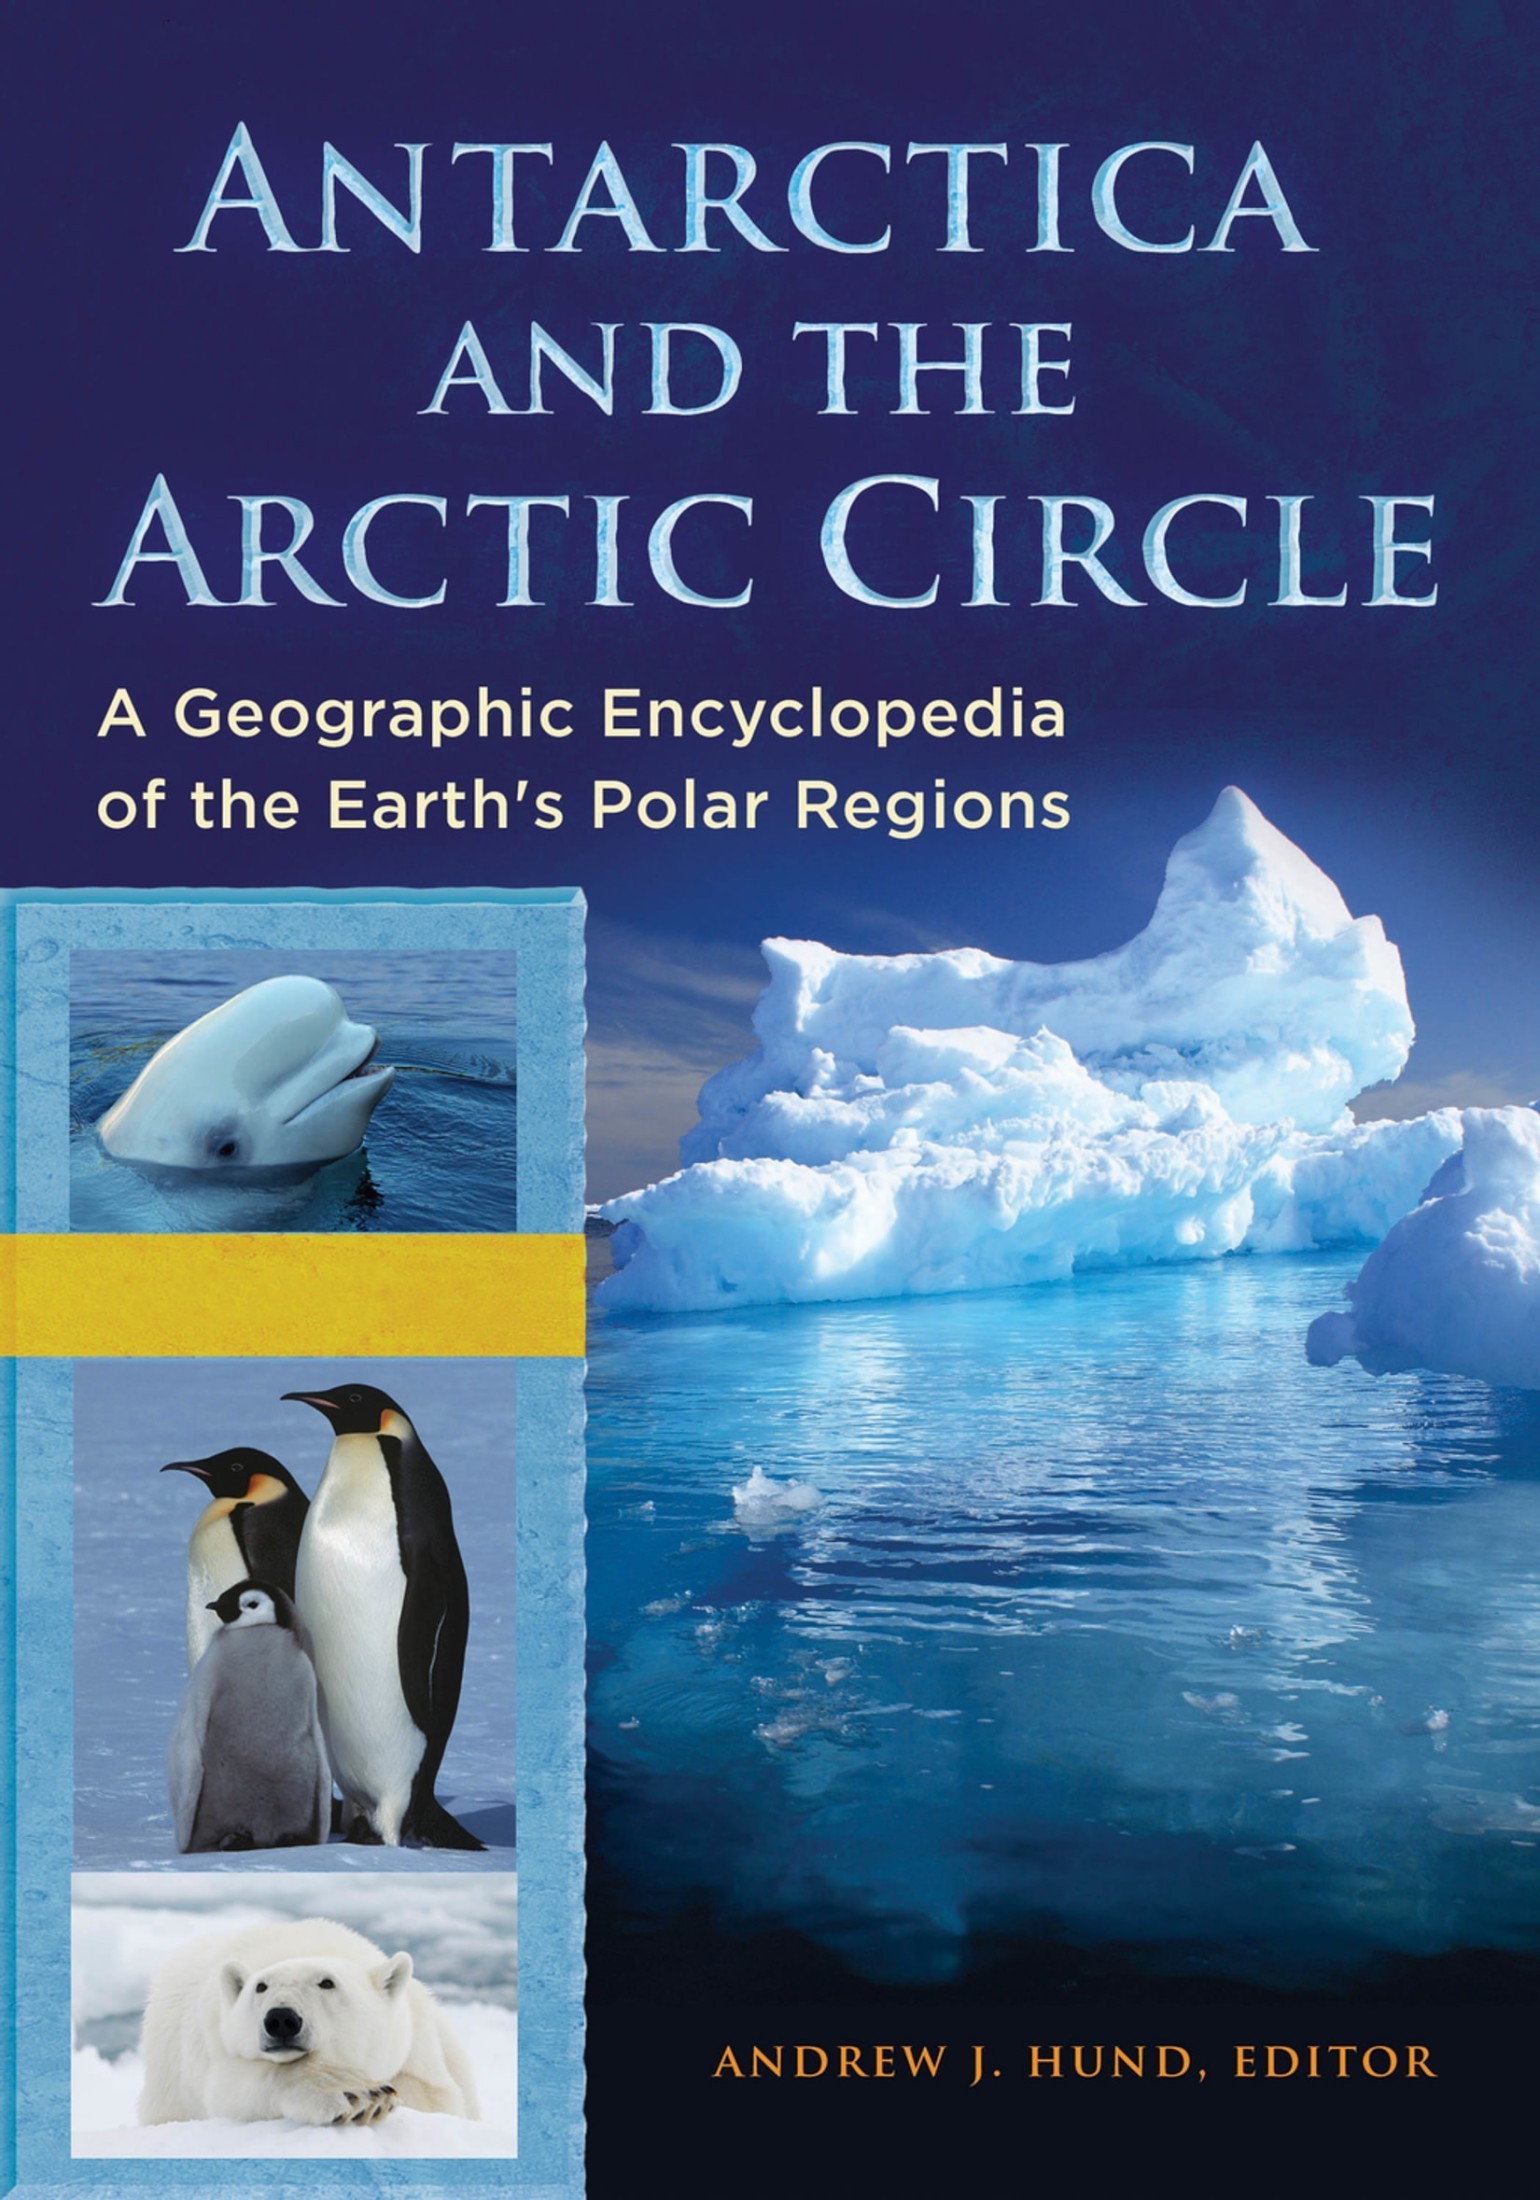 Antarctica and the Arctic Circle: A Geographic Encyclopedia of the Earth's Polar Regions [2 volumes]